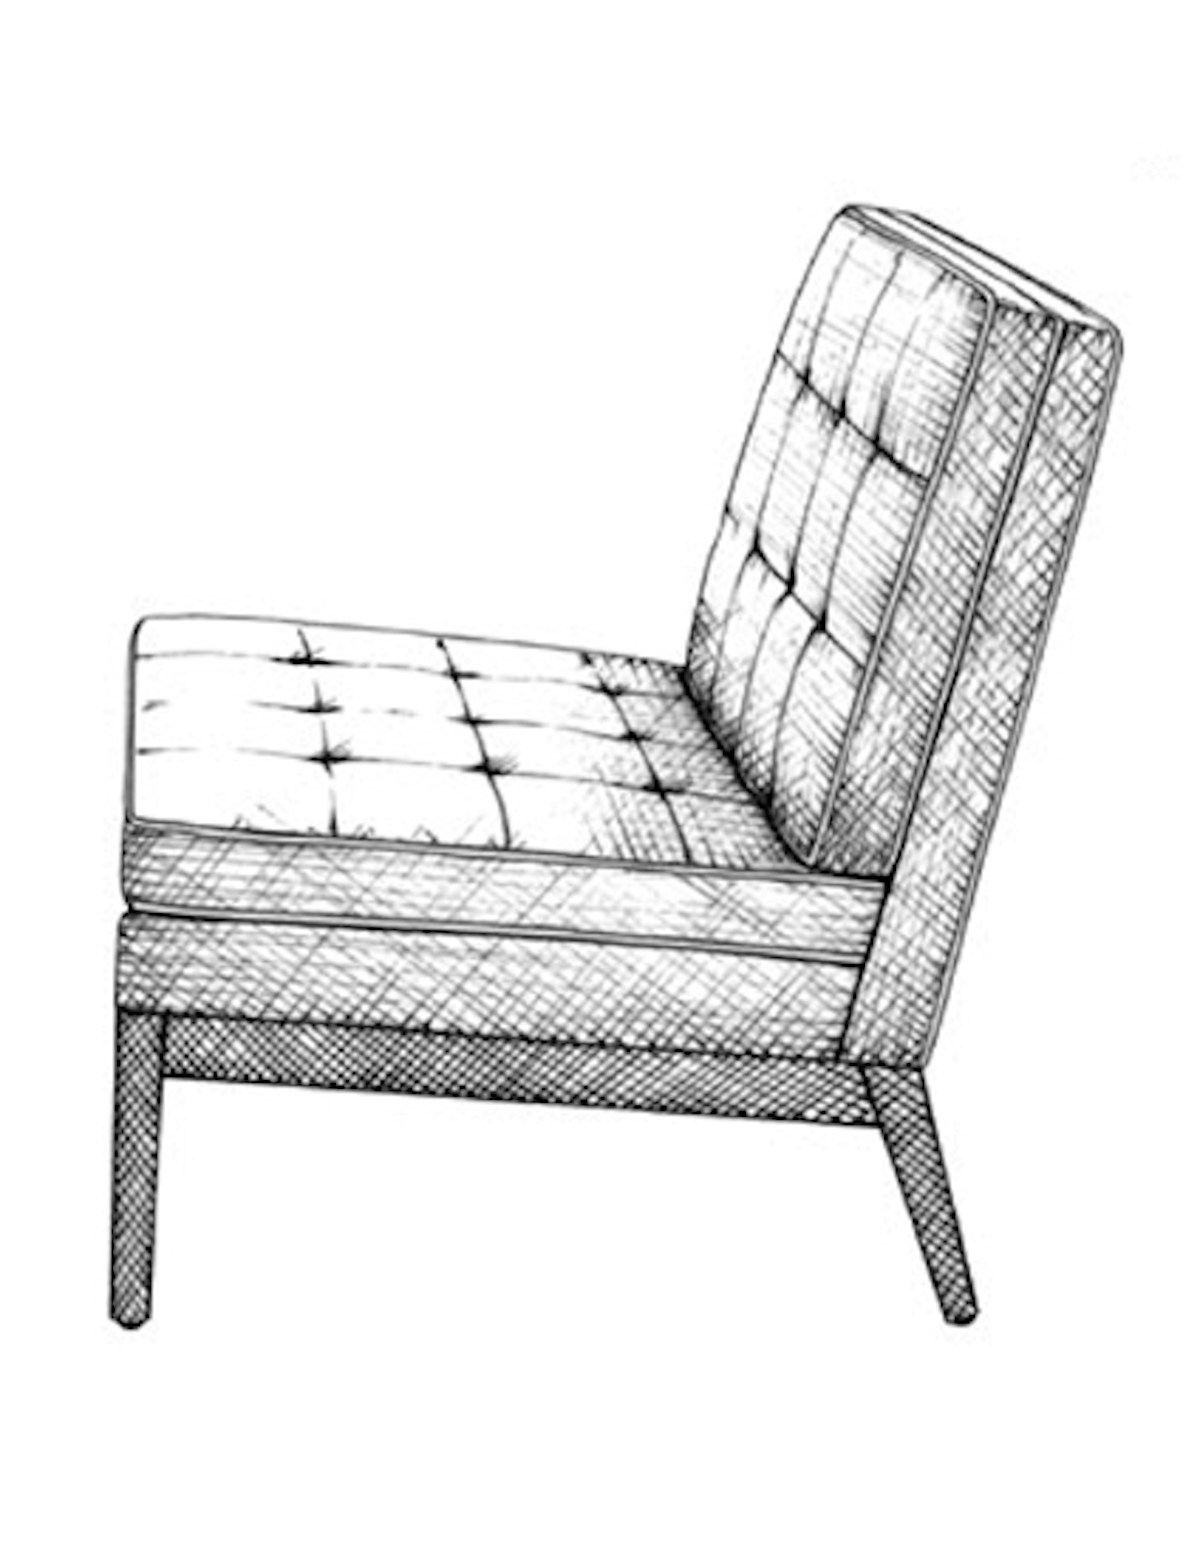 The Best of Chair Design - Top 10 Chair Styles - Knoll lounge chair